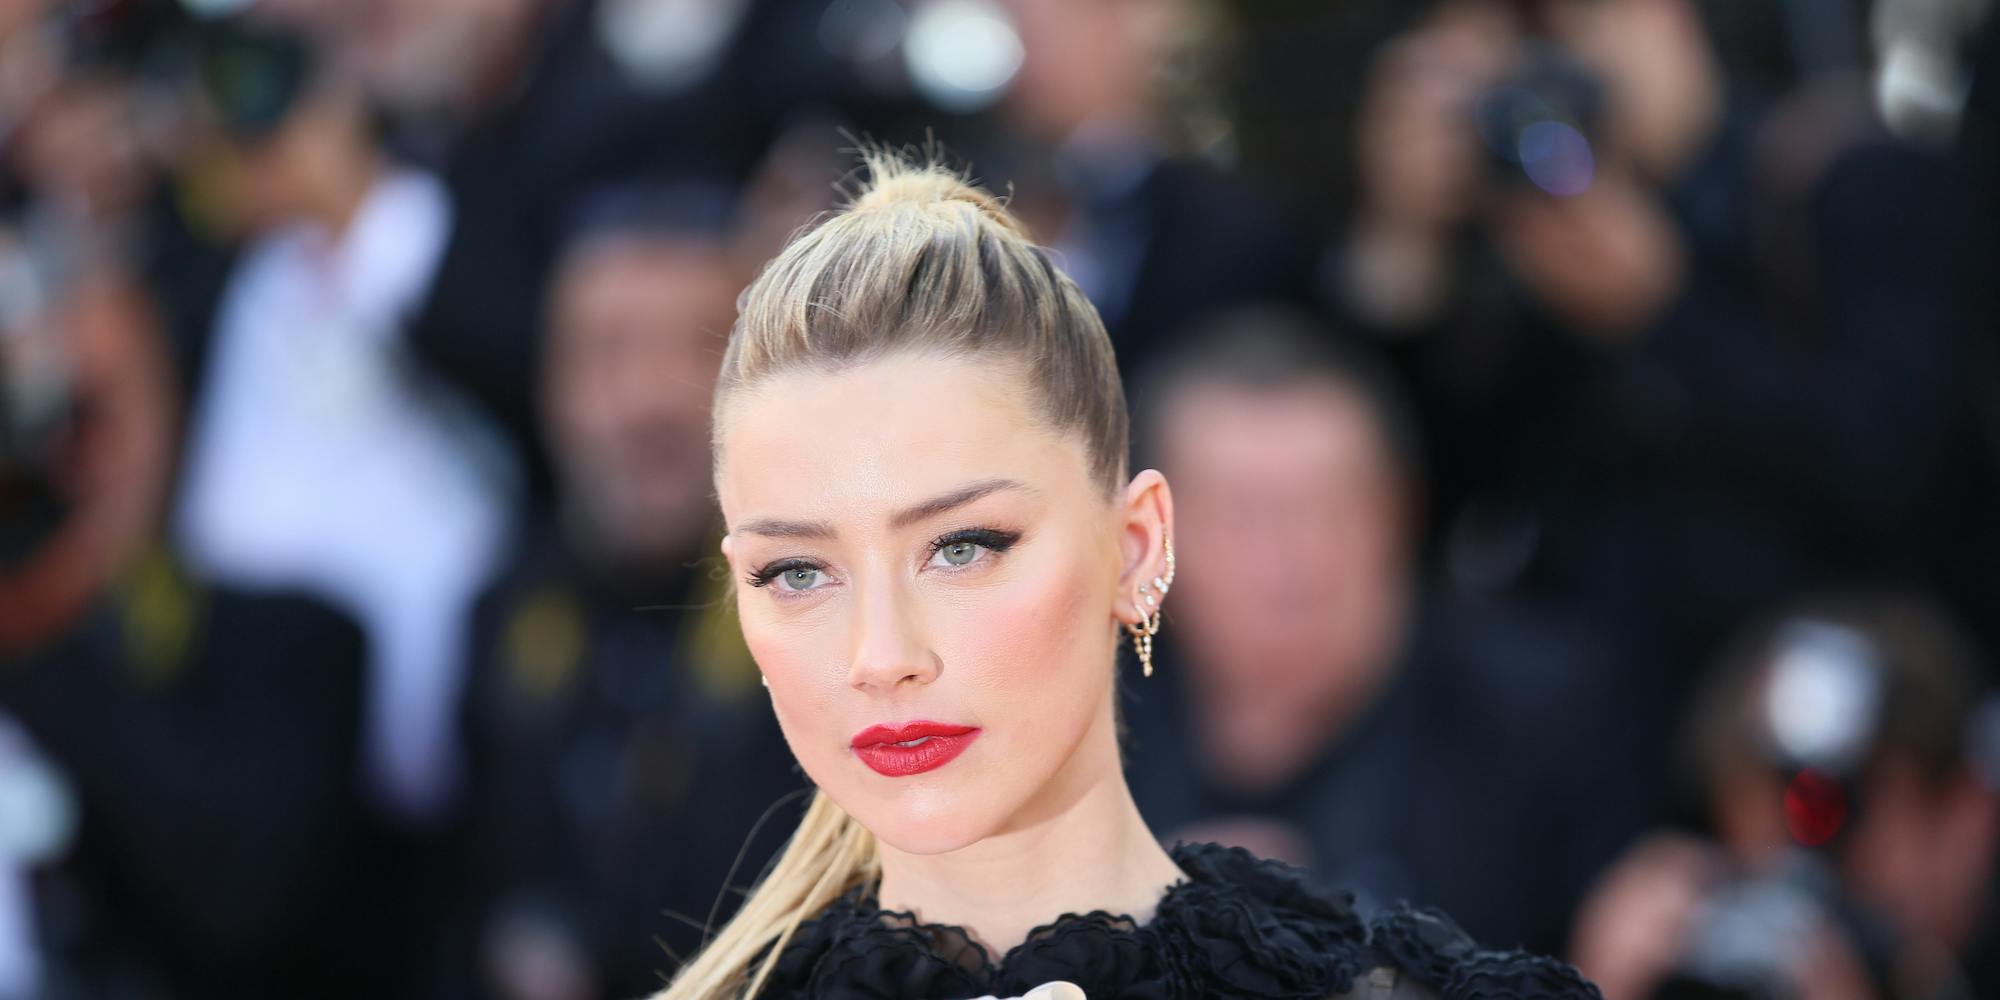 Amber Heard attends the screening at cannes